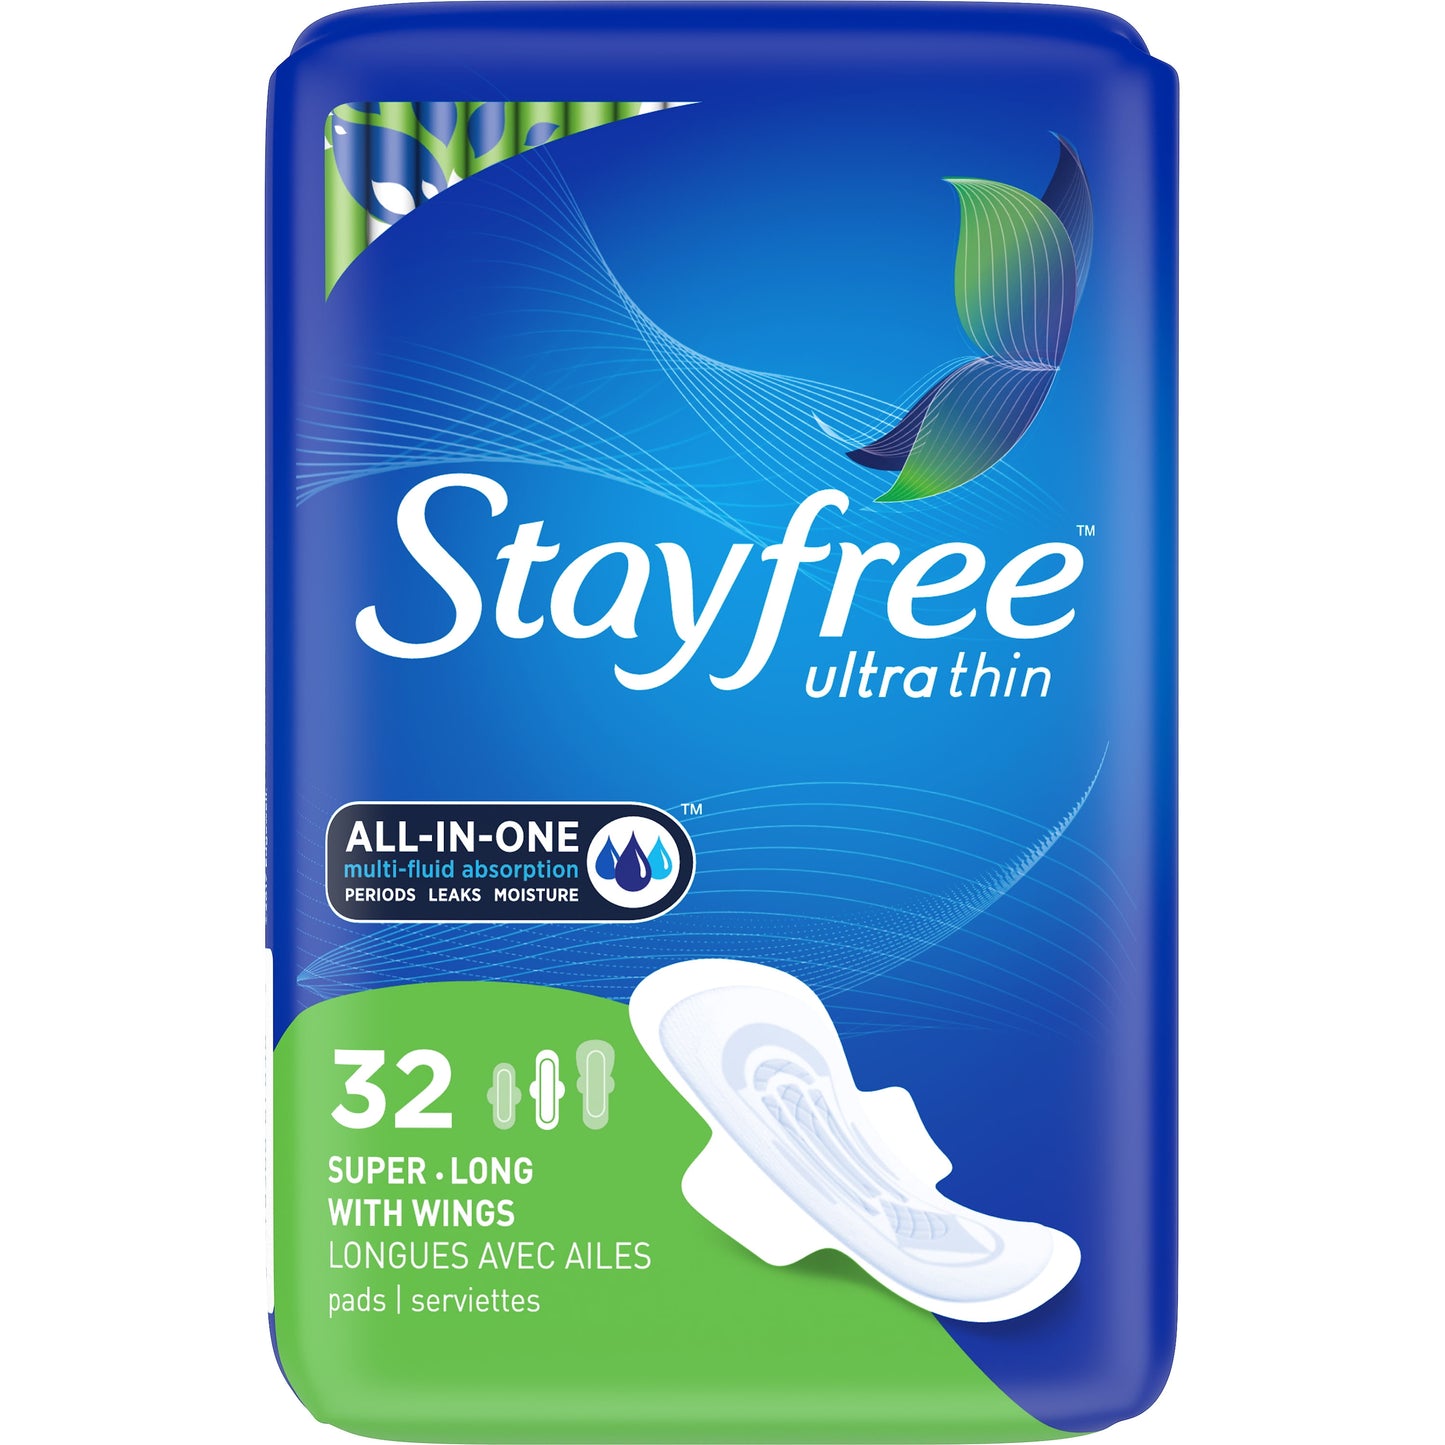 Stayfree Ultra Thin Super Long Pads With Wings, 32ct, Multi-Fluid Protection For Up To 8 Hours, With Odor Neutralizer